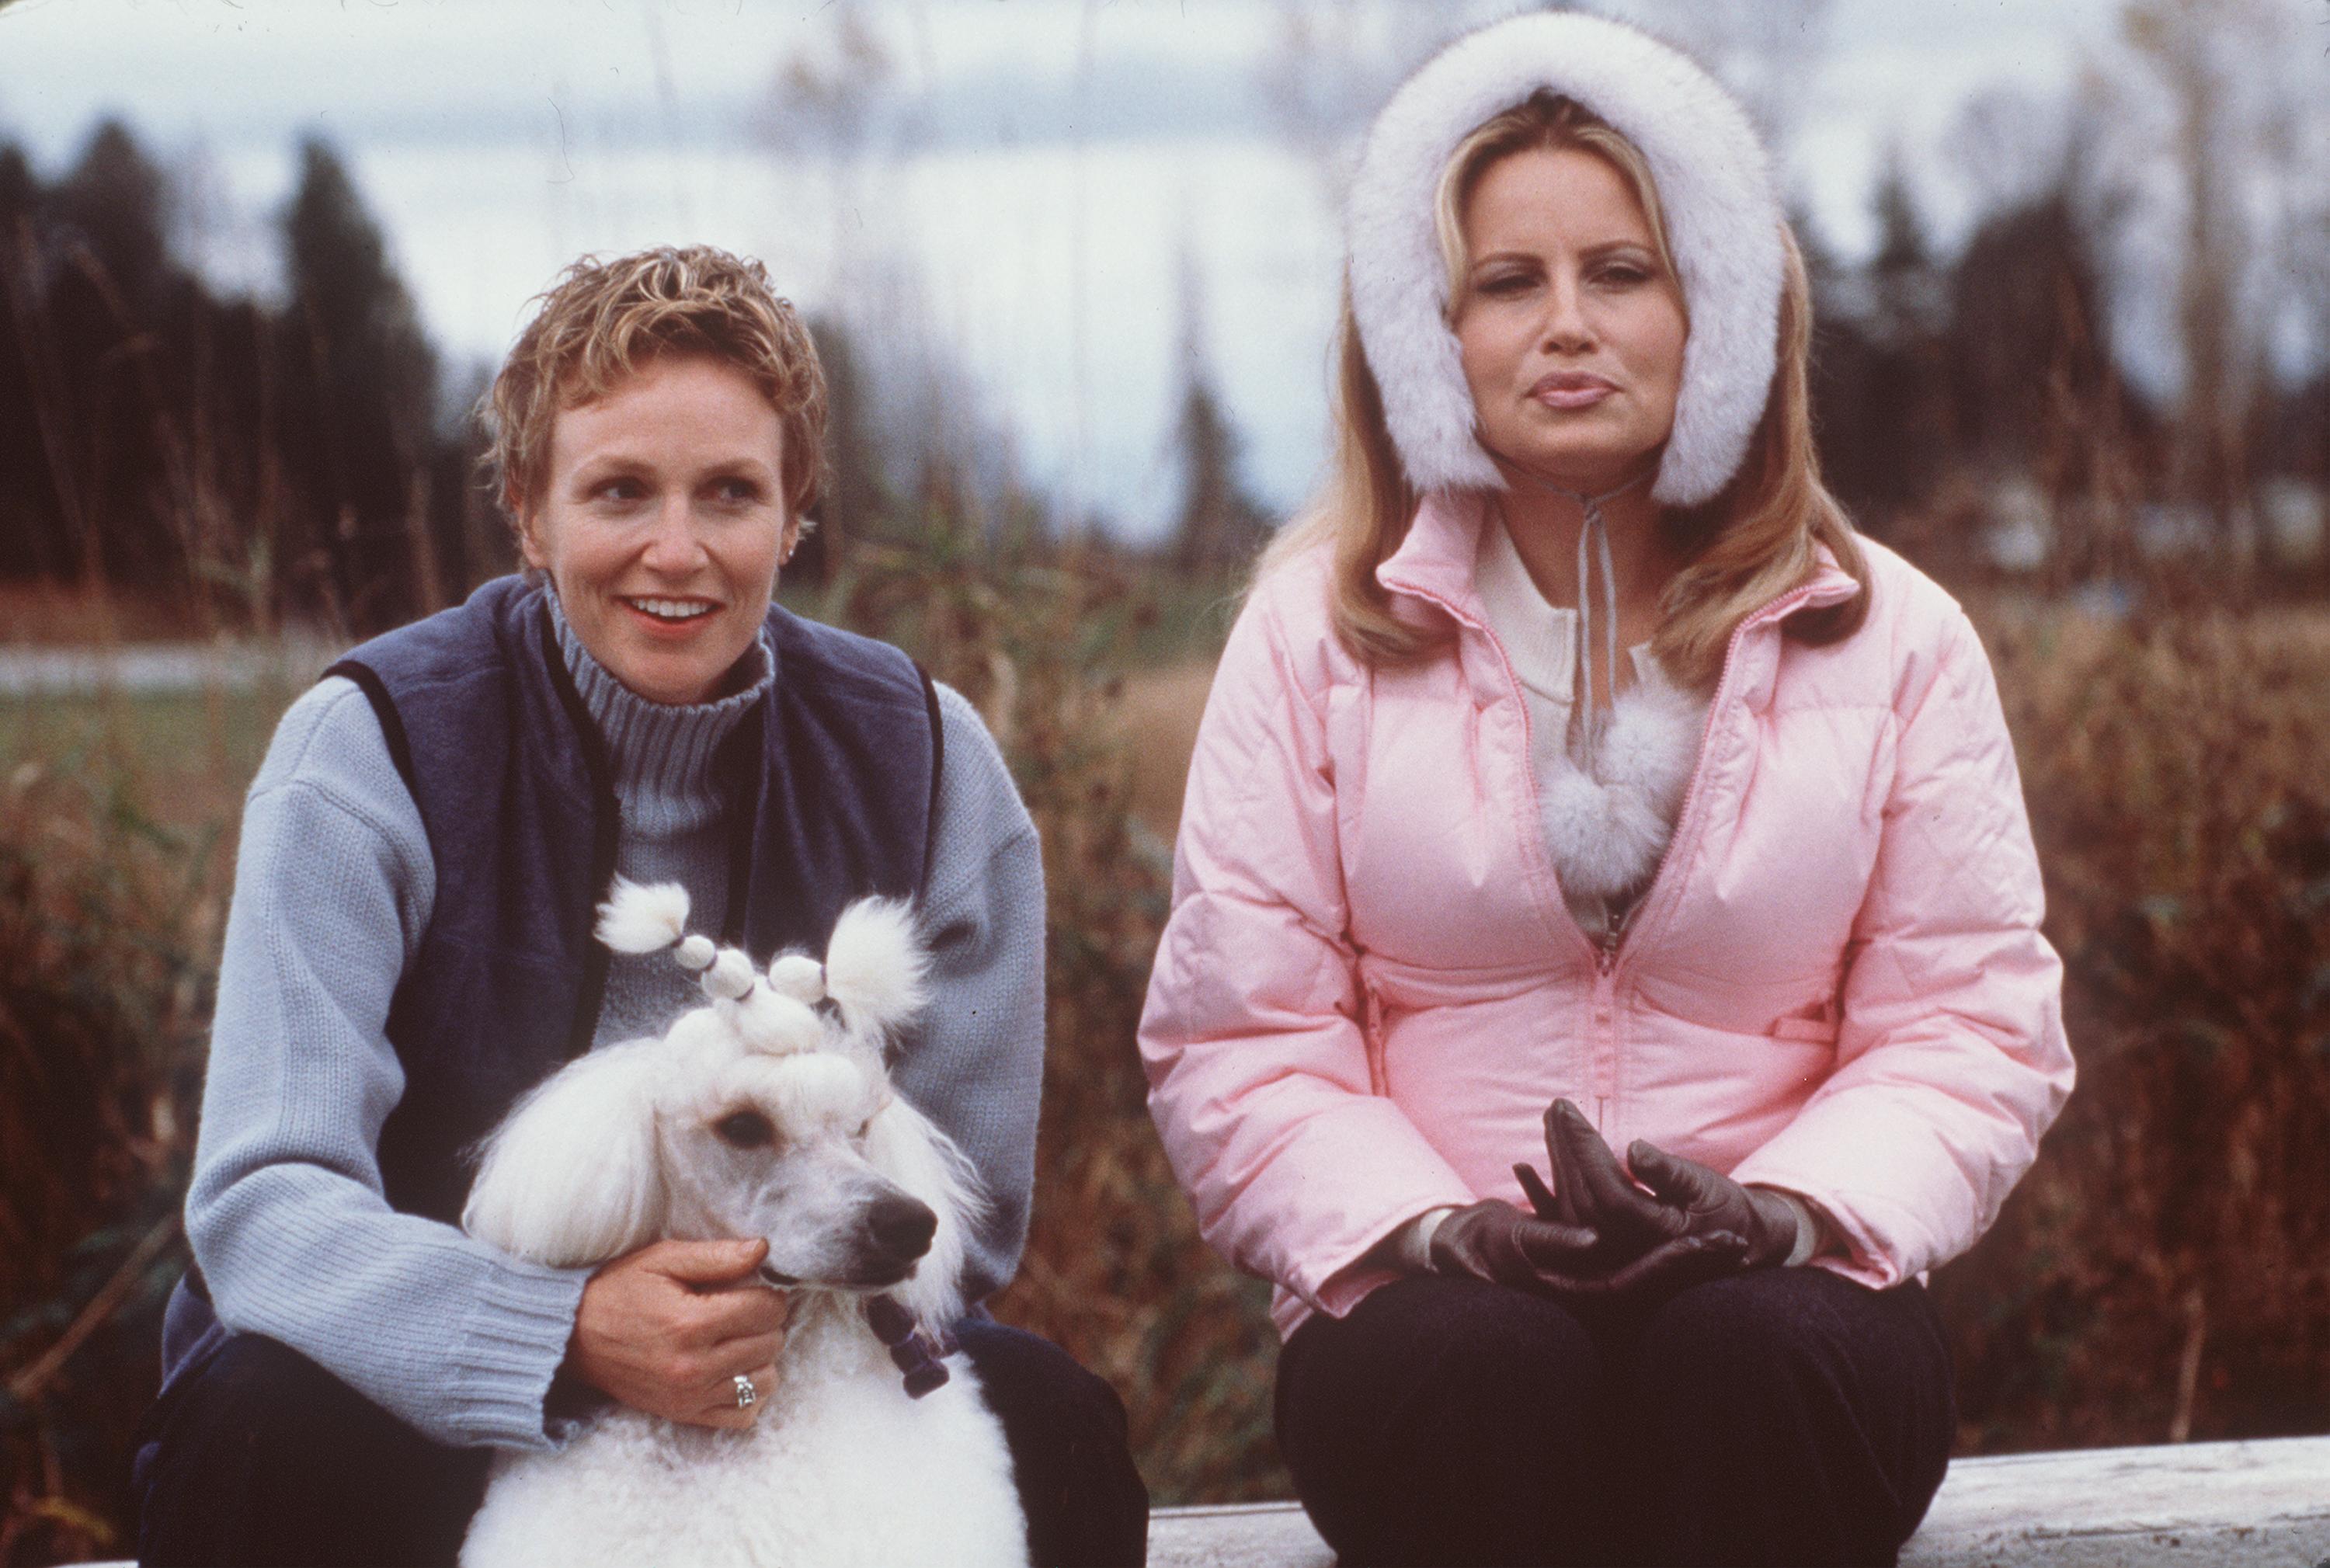 Jane Lynch as Christy Cummings and Jennifer Coolidge as Sherri Ann Ward in Castle Rock Entertainment's film, "Best In Show" | Source: Getty Images